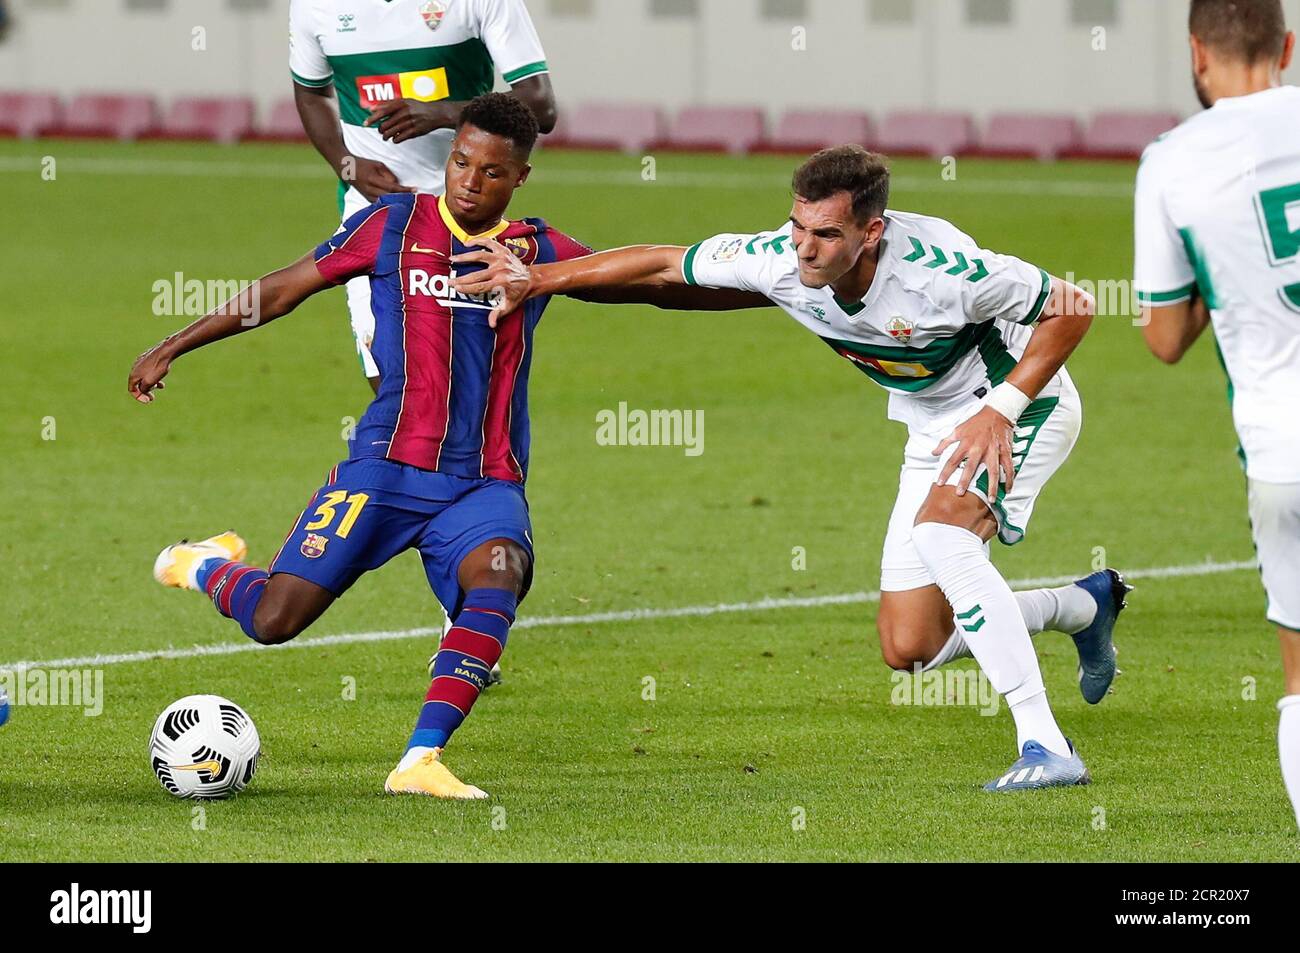 Barcelona, Barcelona, Spain. 19th Sep, 2020. Ansu Fati of FC Barcelona in action during the Gamper Trophy match between FC Barcelona and Elche at Camp Nou on September 19, 2020 in Barcelona, Spain. Credit: David Ramirez/DAX/ZUMA Wire/Alamy Live News Stock Photo